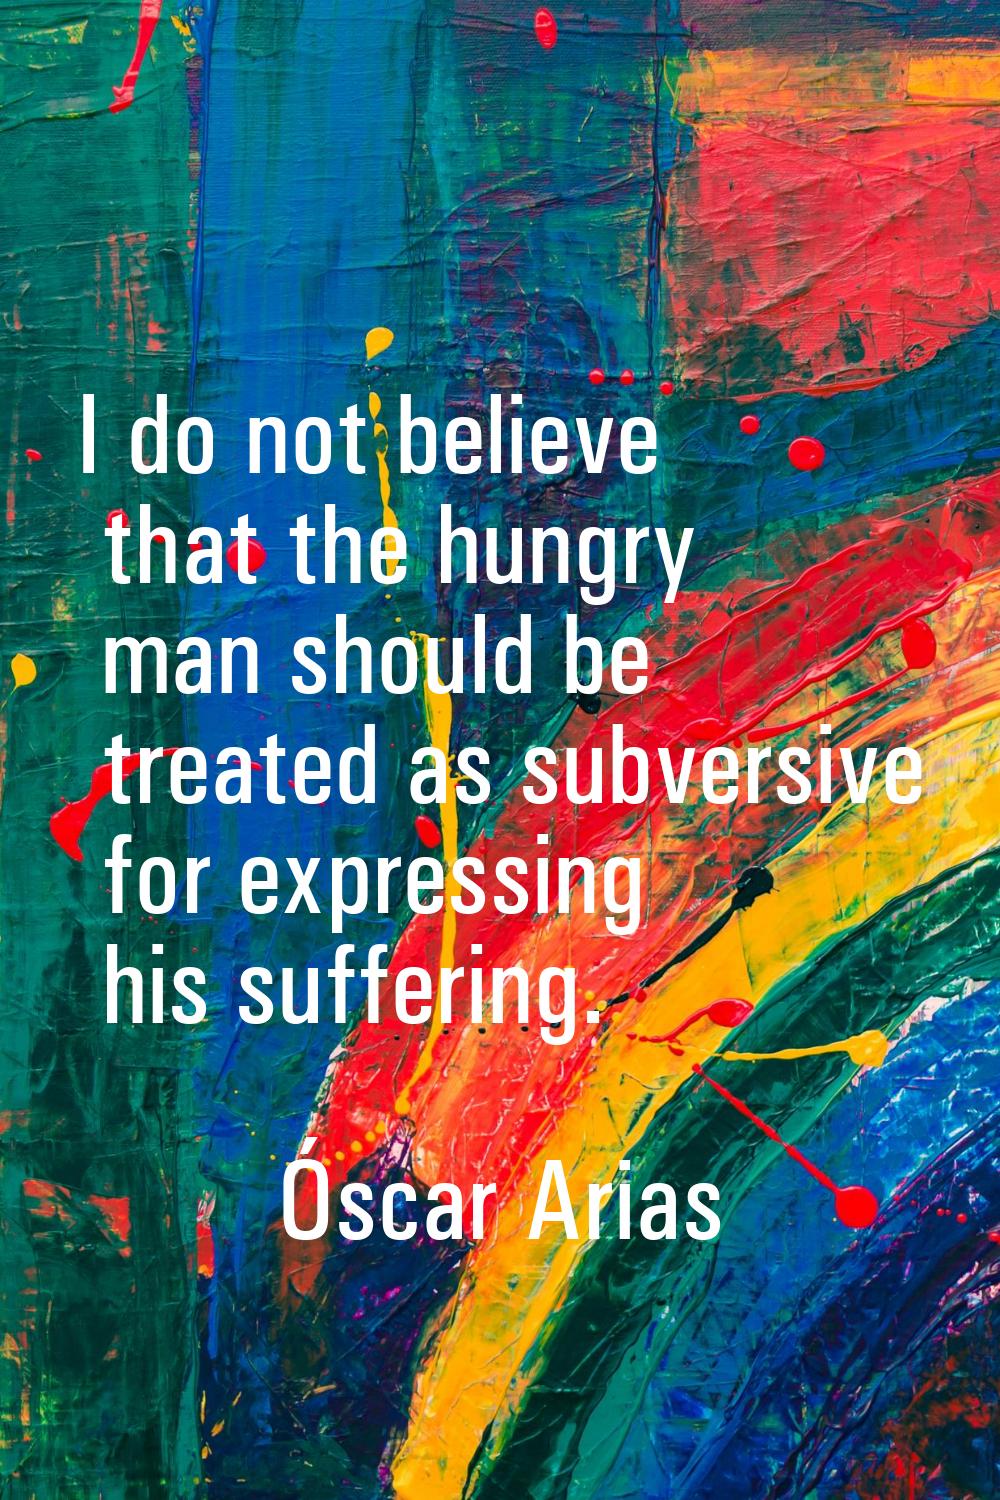 I do not believe that the hungry man should be treated as subversive for expressing his suffering.